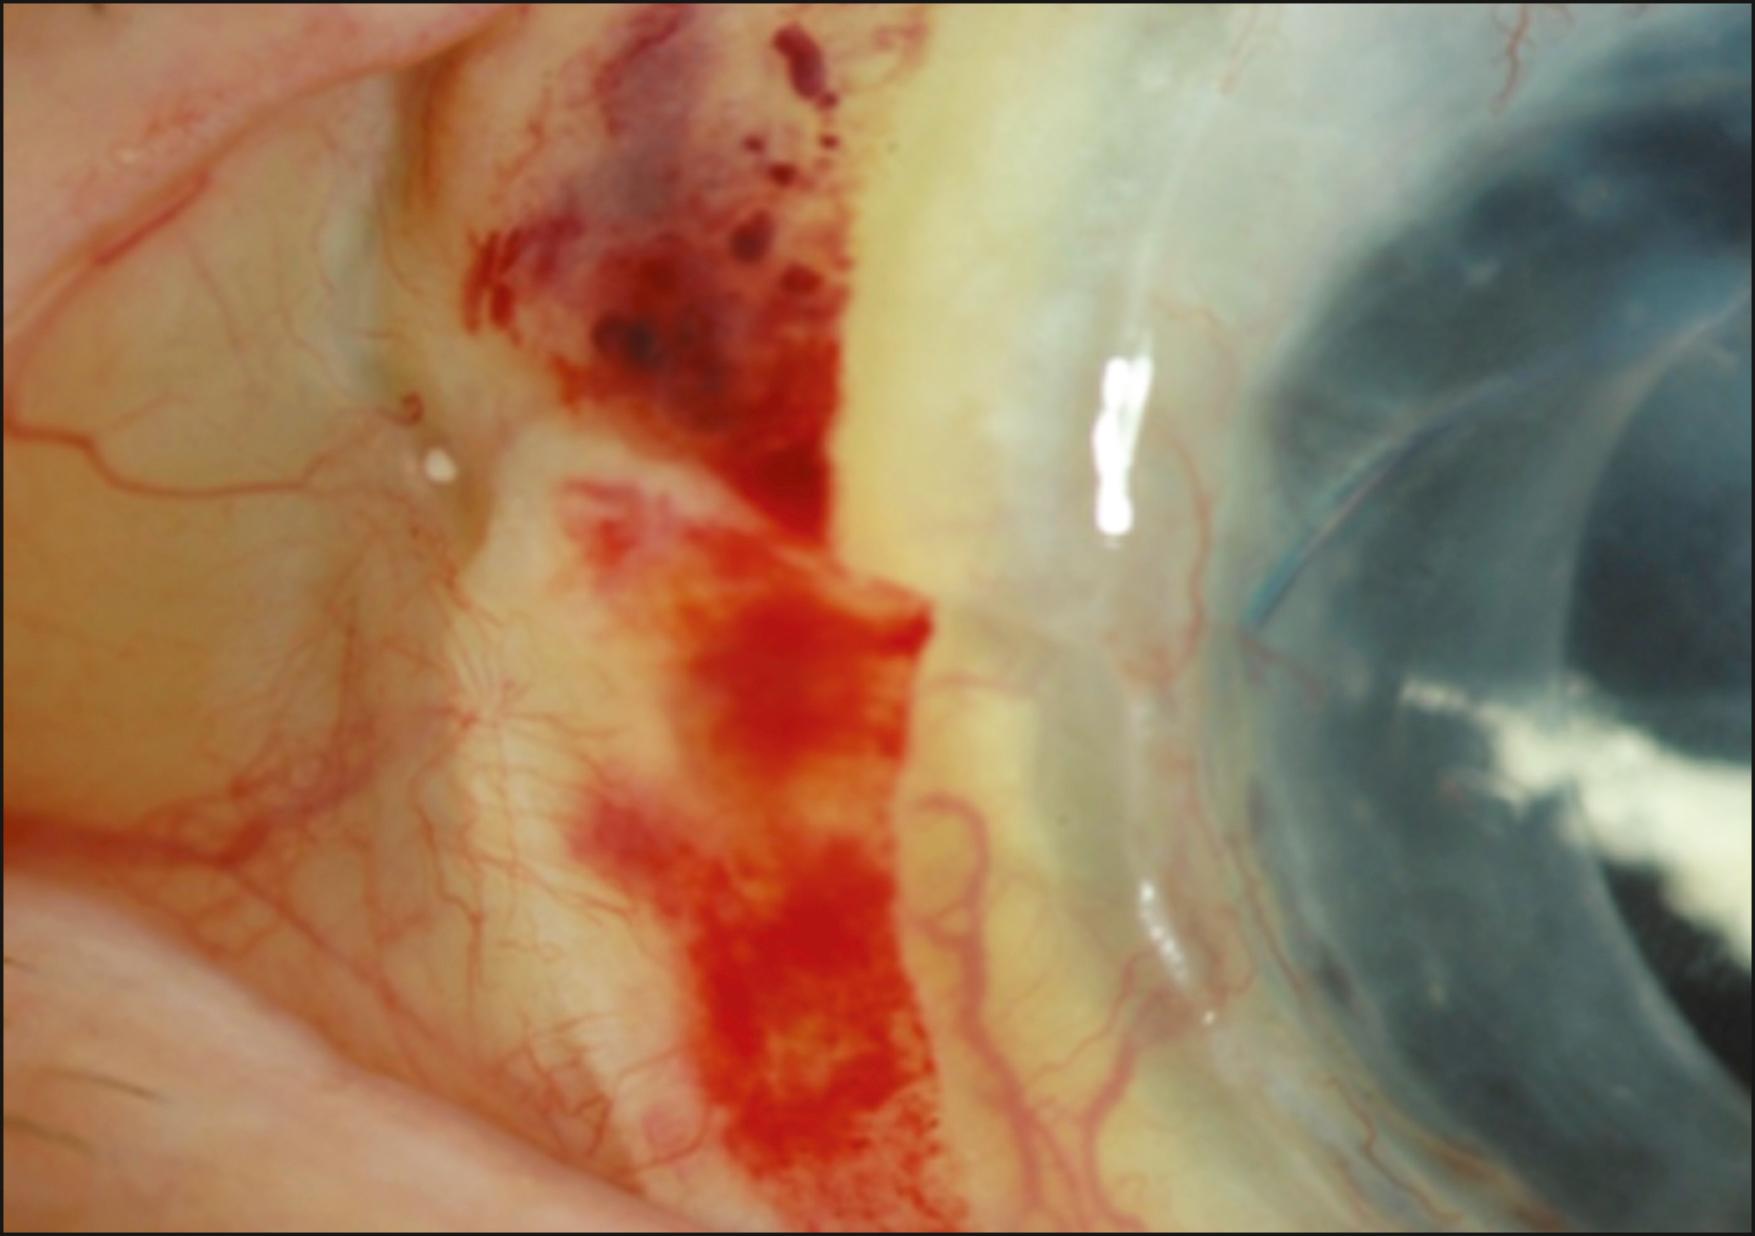 Fig. 169.4, A 71-year-old female with history of keratolimbal allograft for aniridia who had been off immunosuppression developed new subconjunctival hemorrhage and injection after skin exposure to poison ivy while gardening. The findings are consistent with early low-grade rejection, which resolved after treatment by oral and topical prednisone.